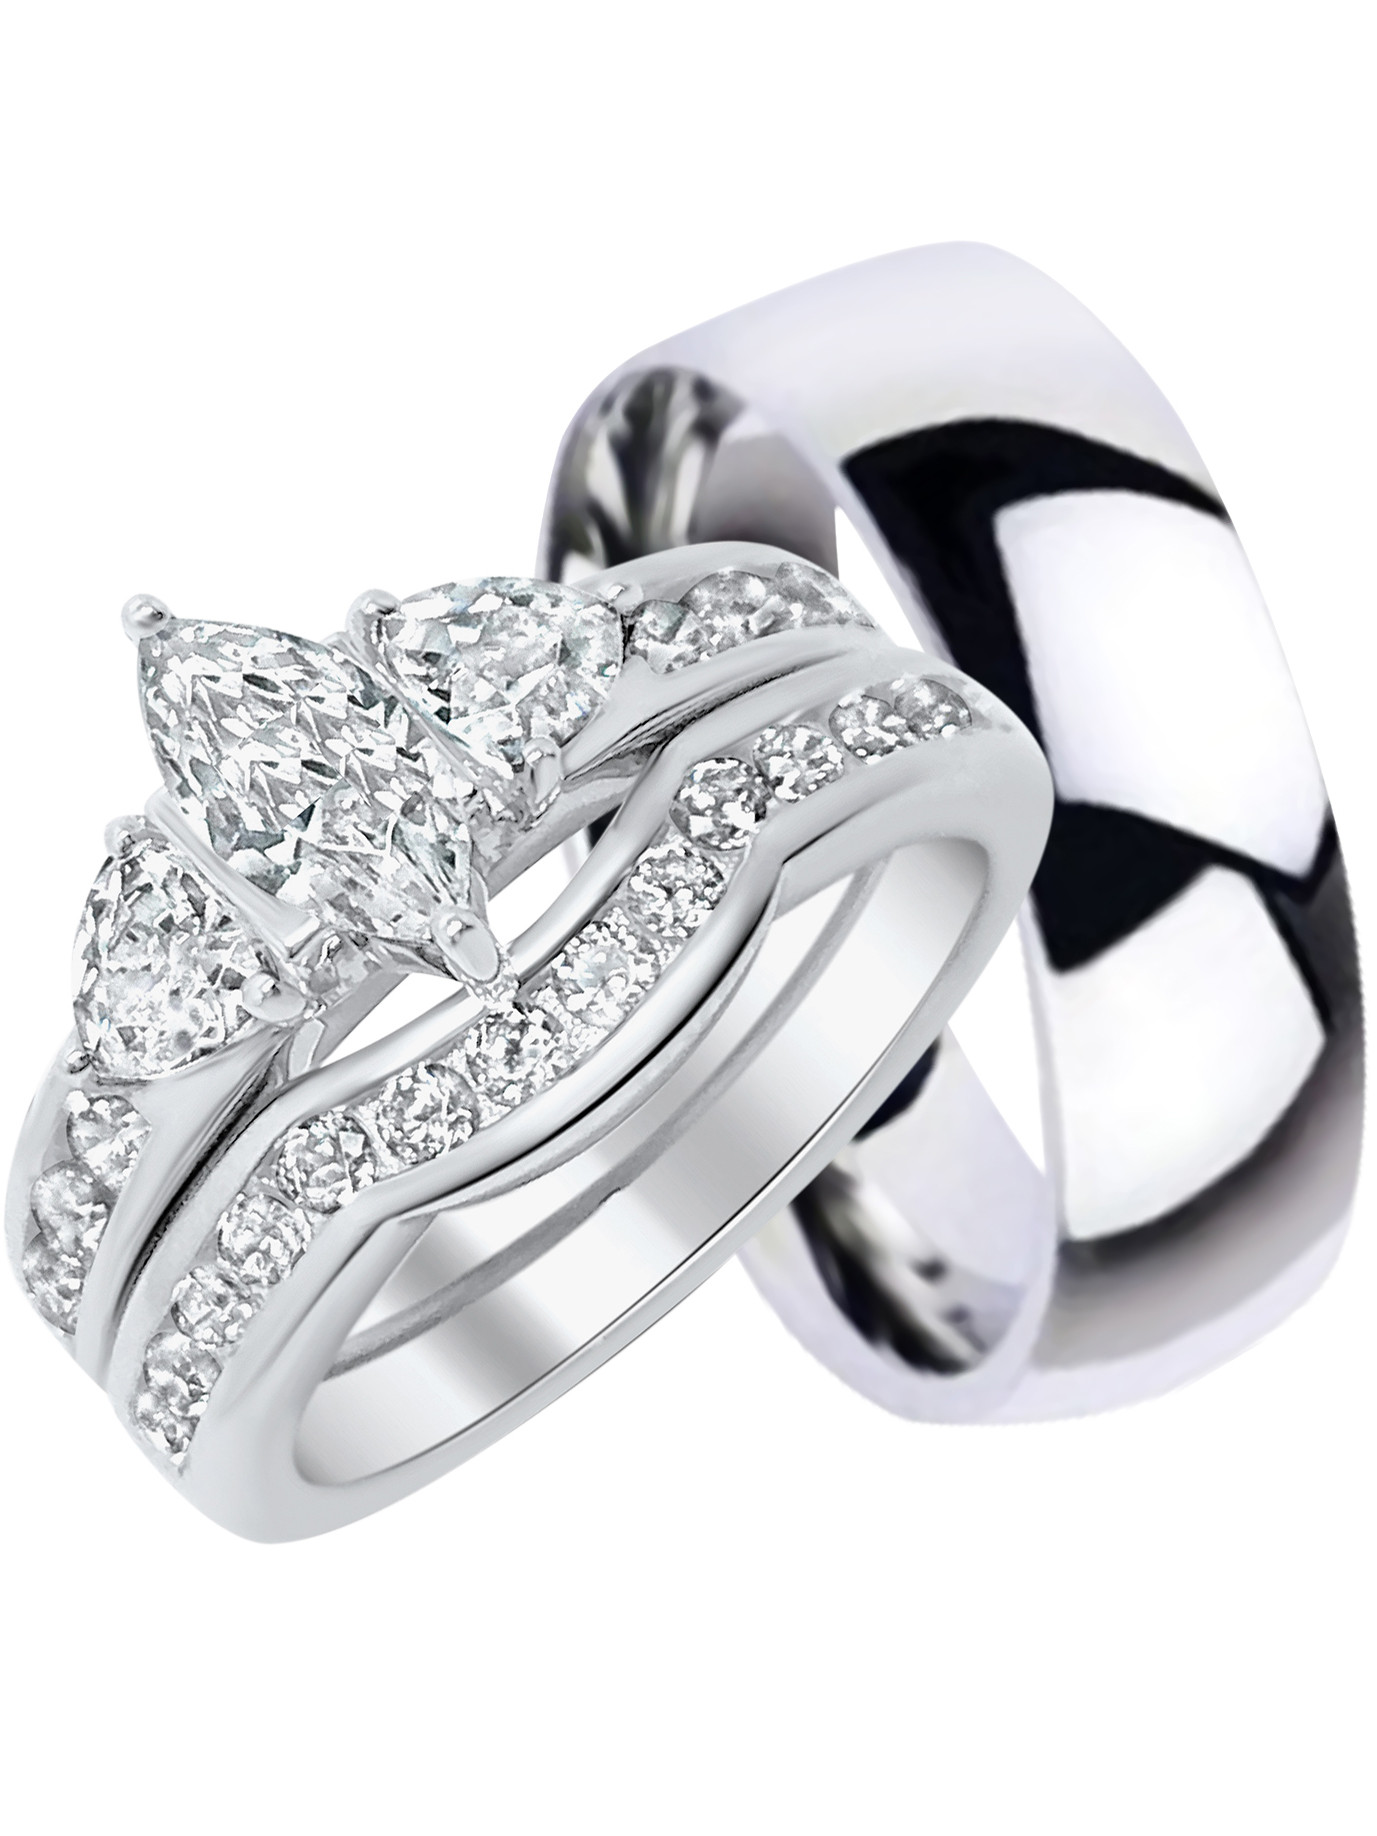 Walmart Wedding Rings Sets For Him And Her
 His and Hers Wedding Ring Set Matching Trio Wedding Bands